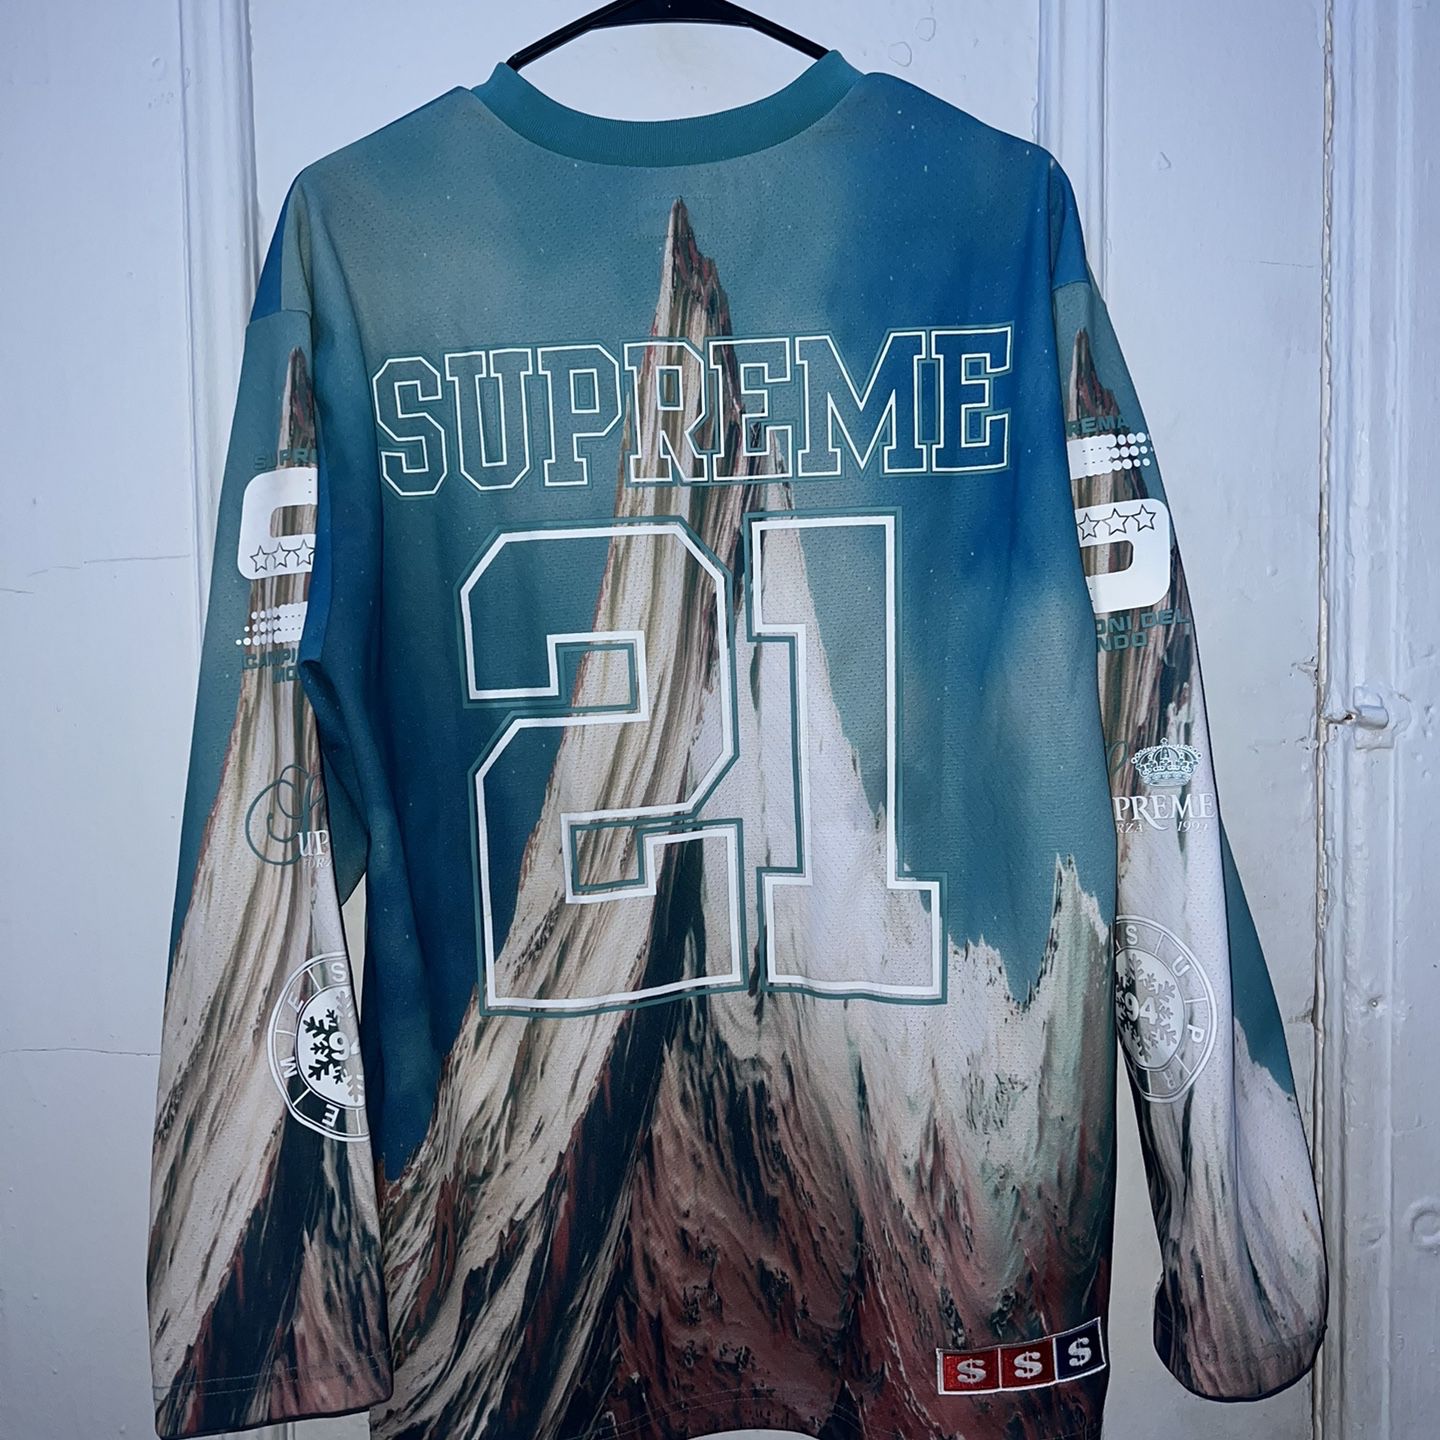 Supreme Mountain Hockey Jersey (Size M) for Sale in Bronx, NY